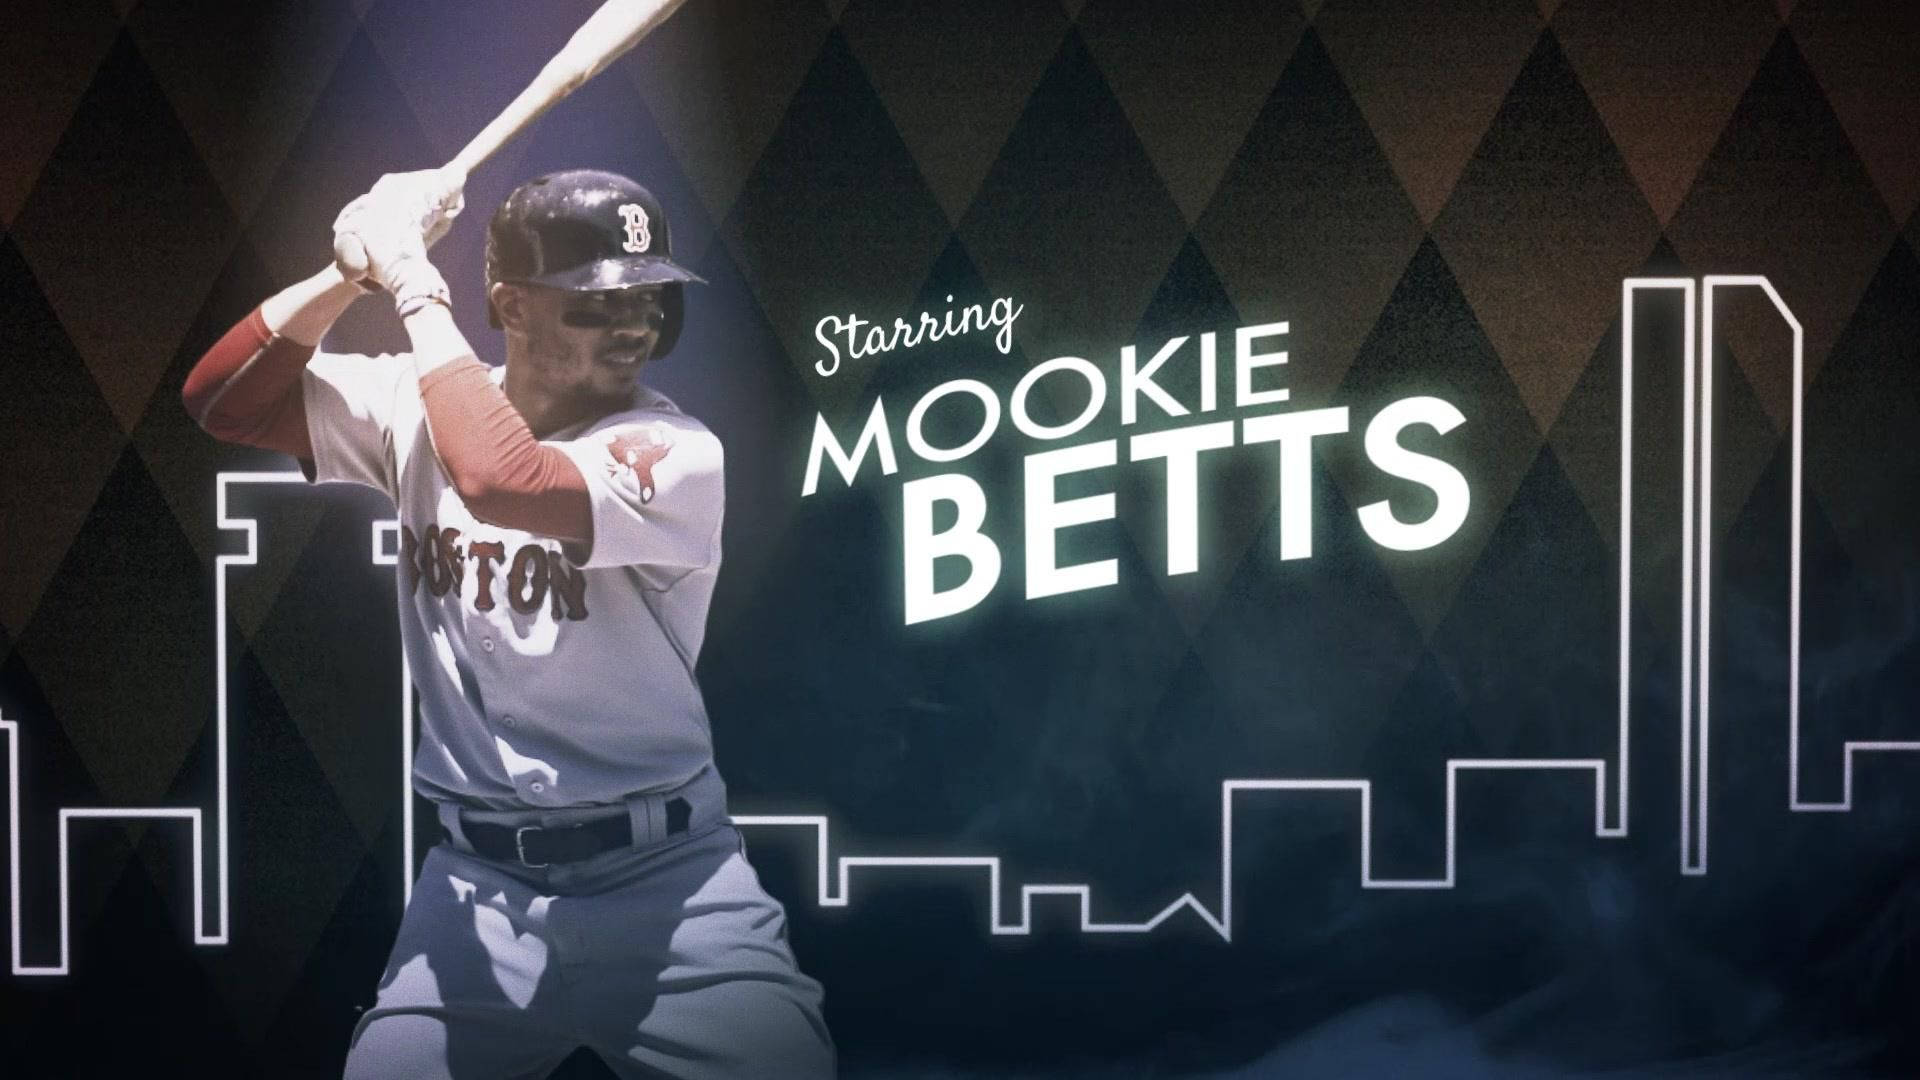 Starring Mookie Betts Background